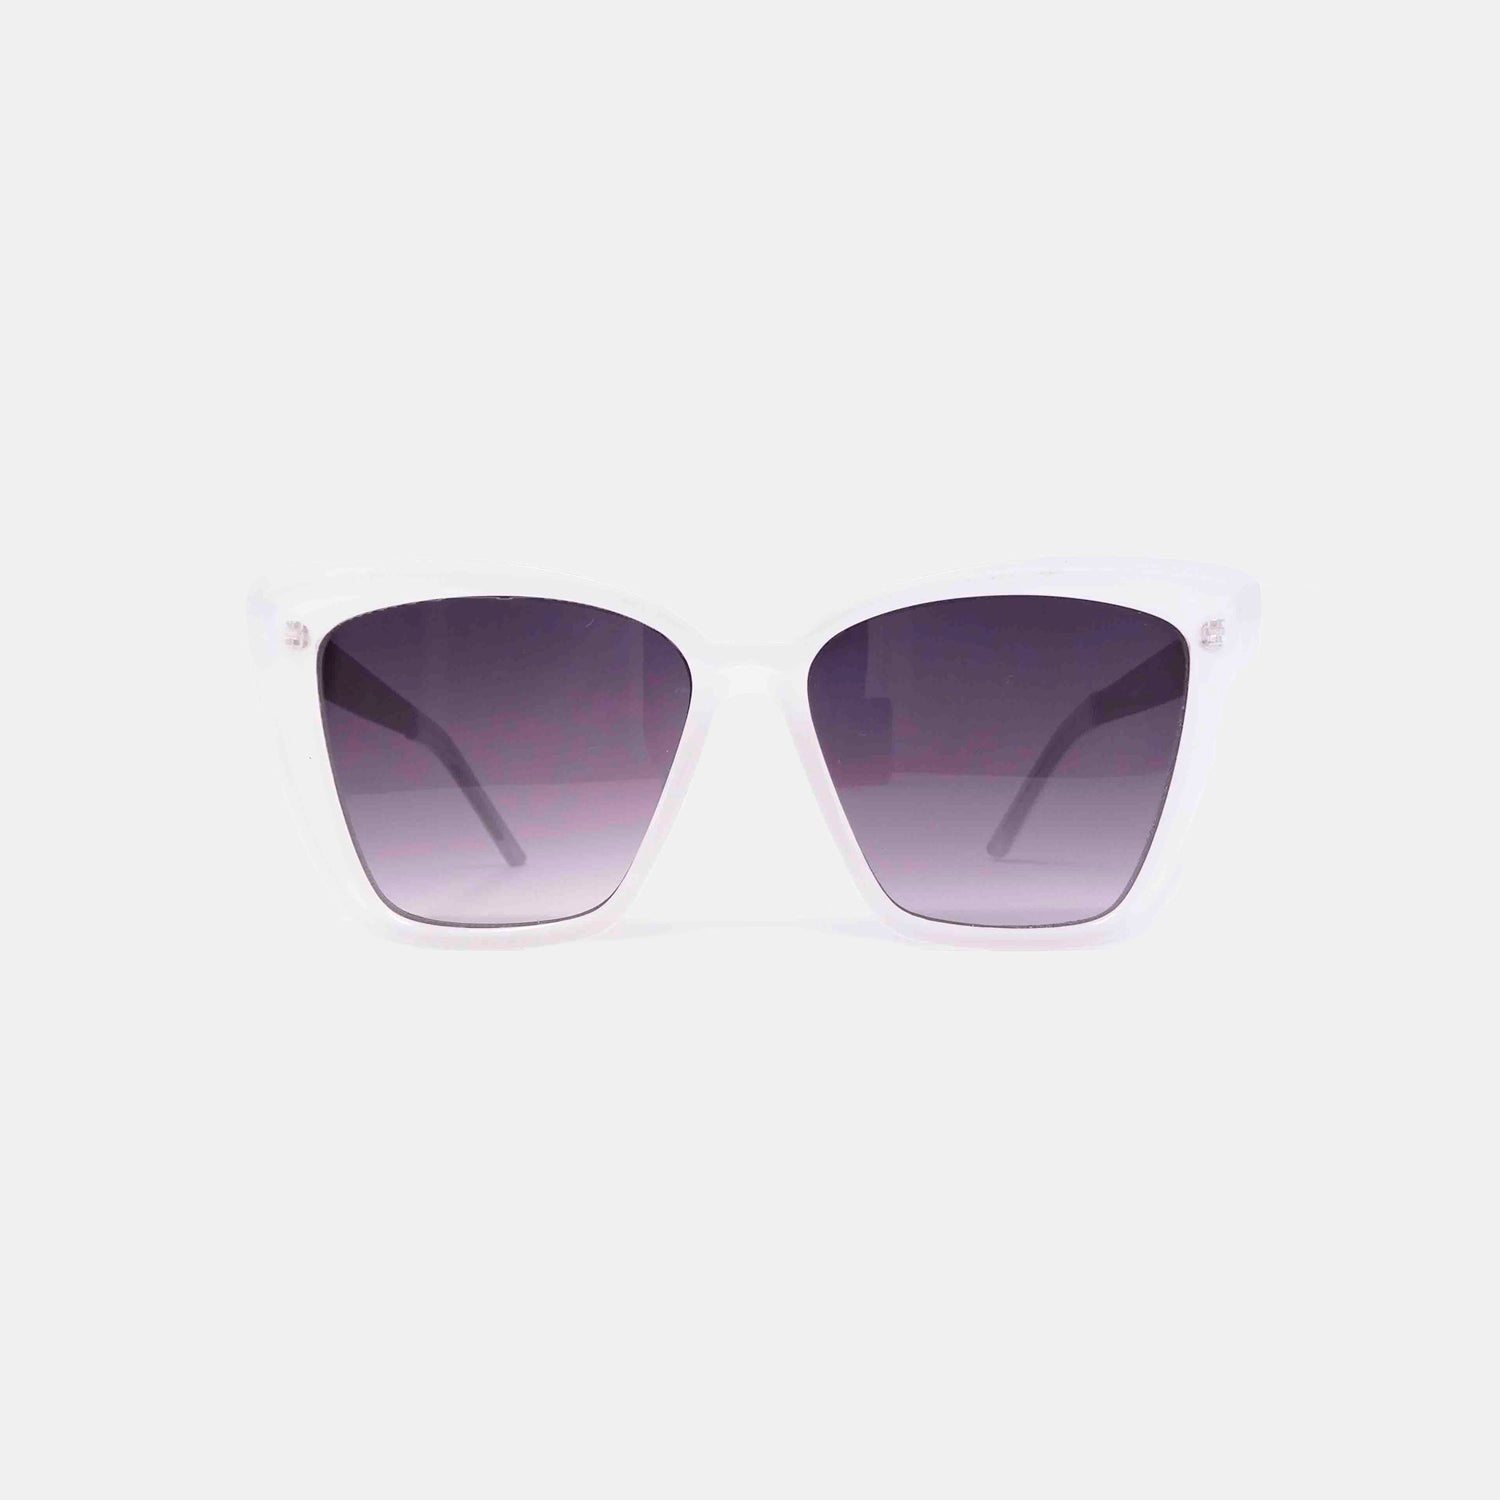 Quirk - New in: Late 90s/early 00s @chanel sunglasses in